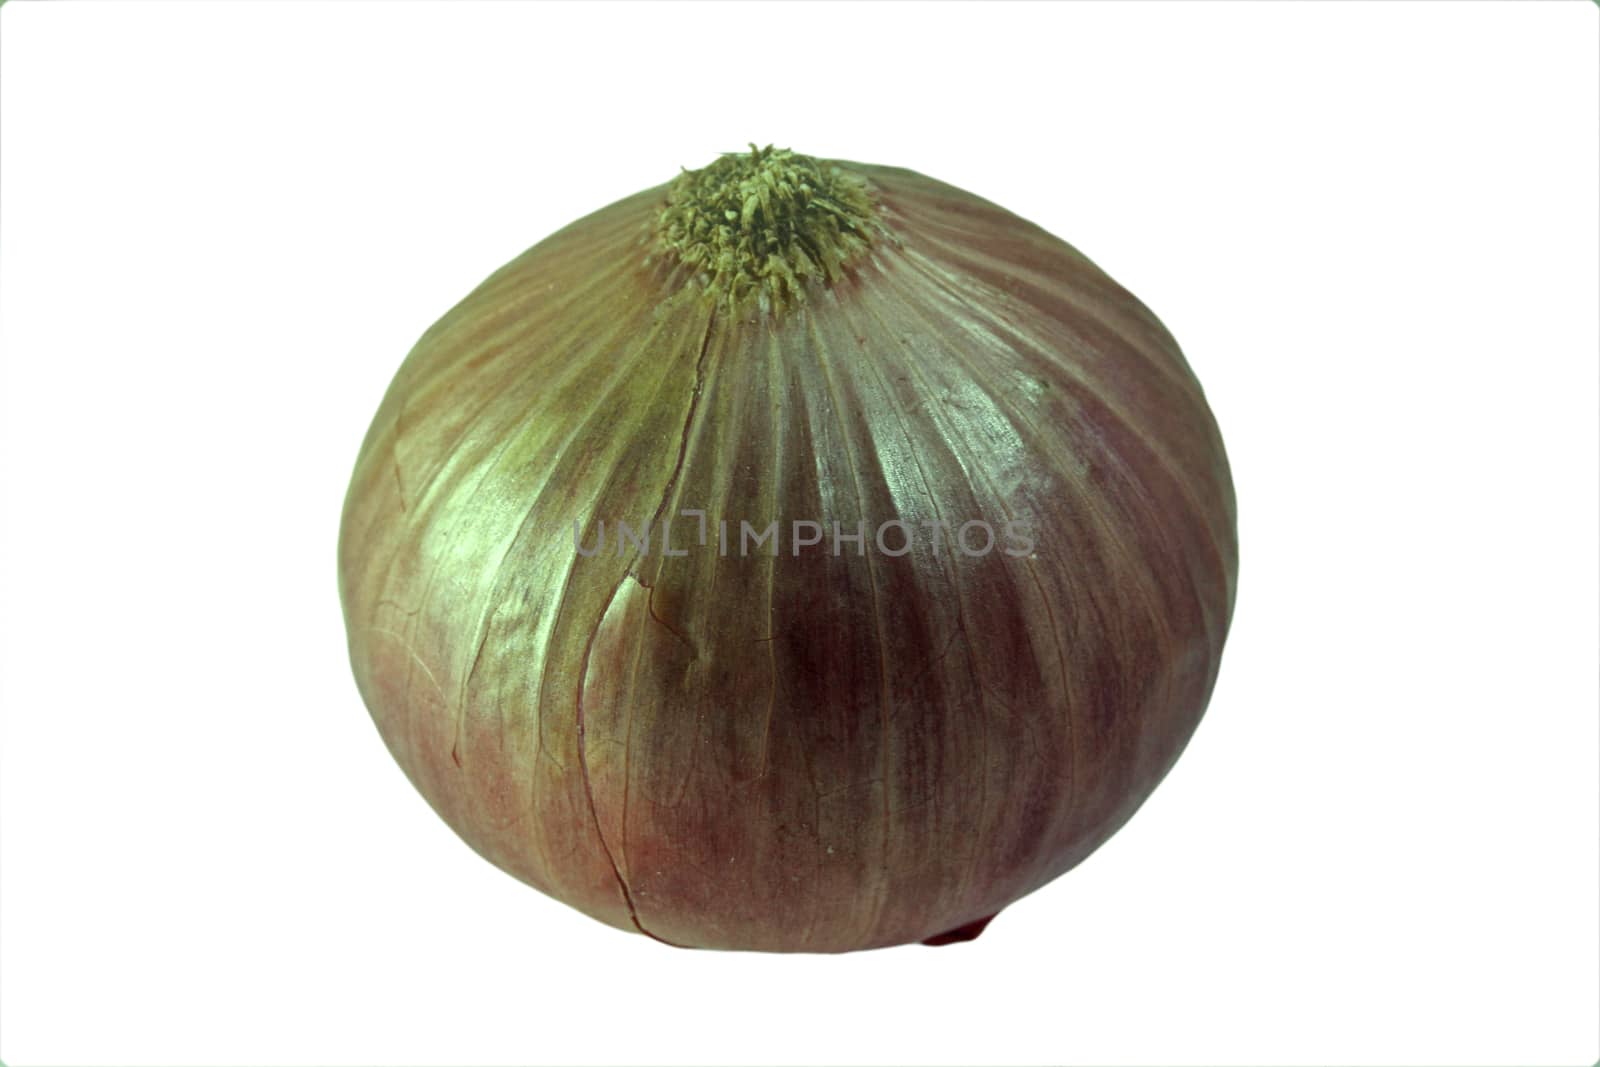 The onion, Allium cepa also known as the bulb onion or common onion, is used as a vegetable and is the most widely cultivated species of the genus Allium.